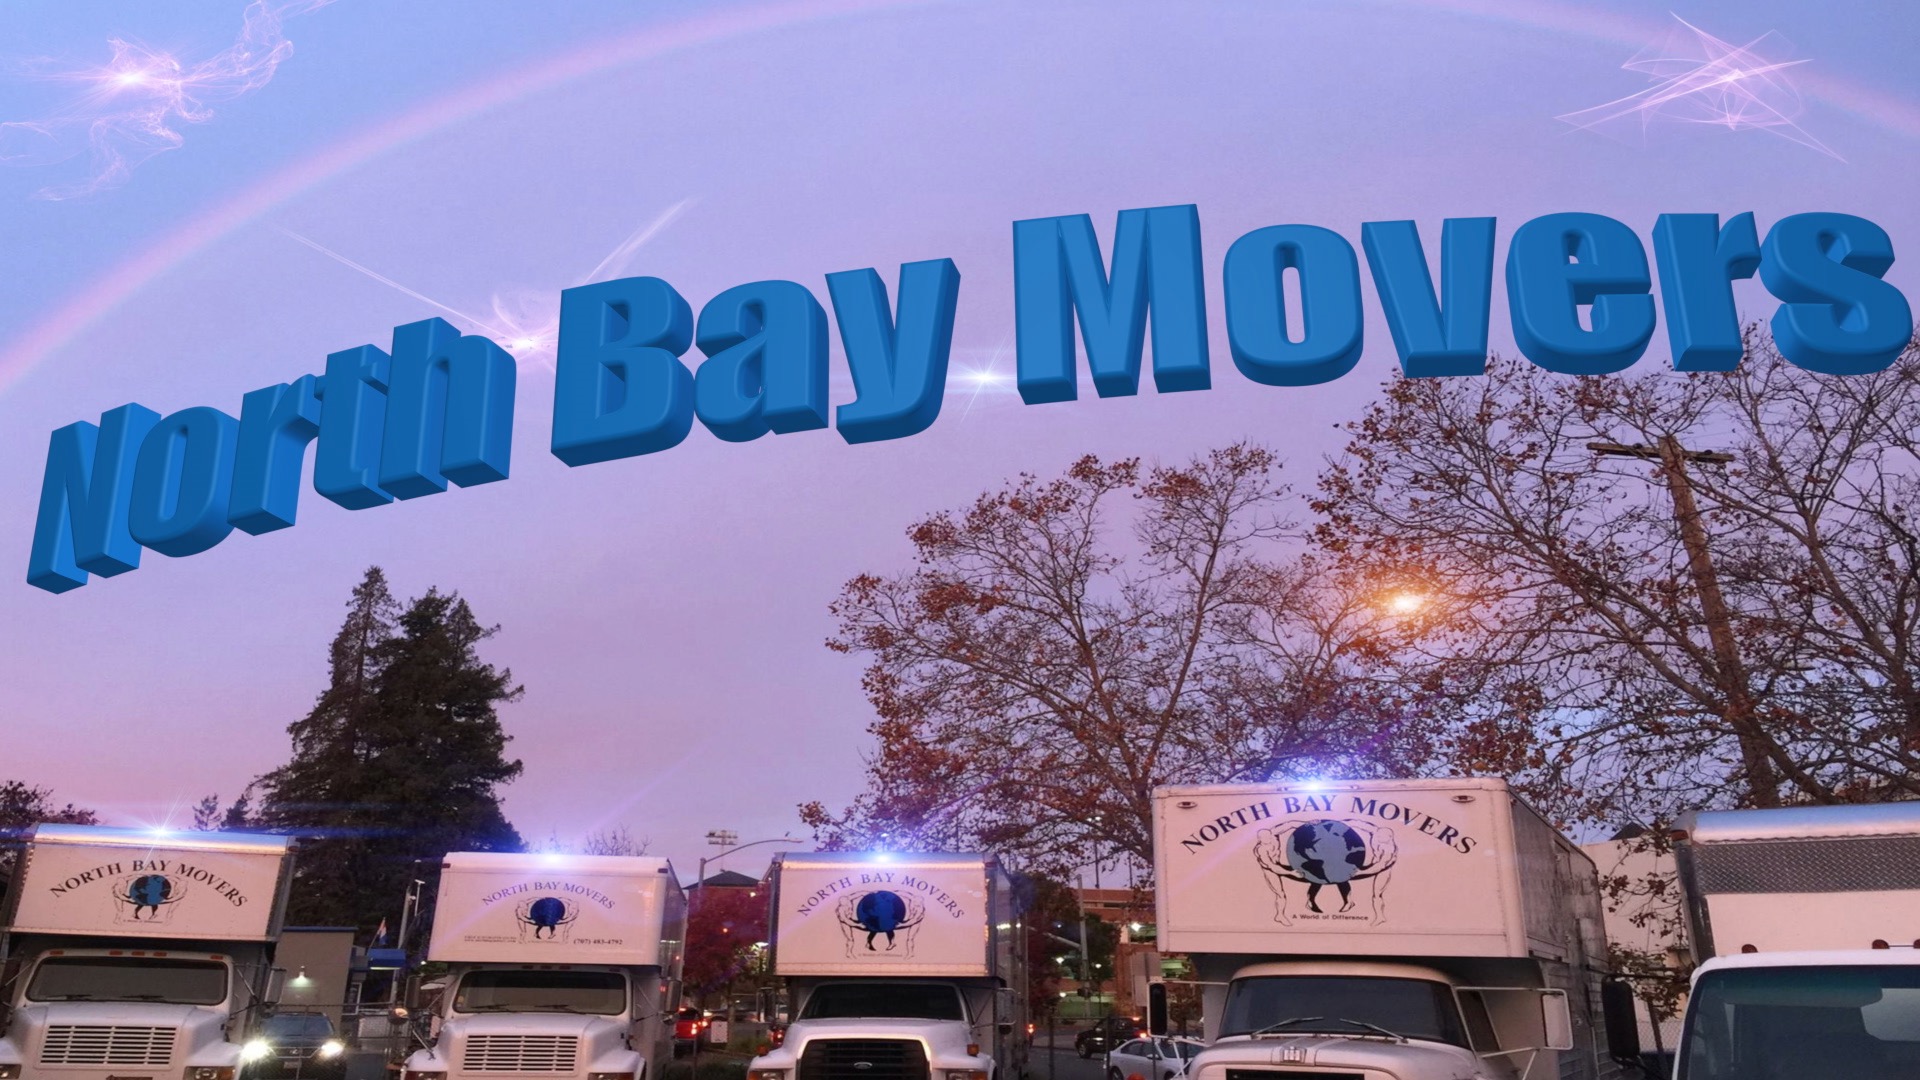 North Bay Movers